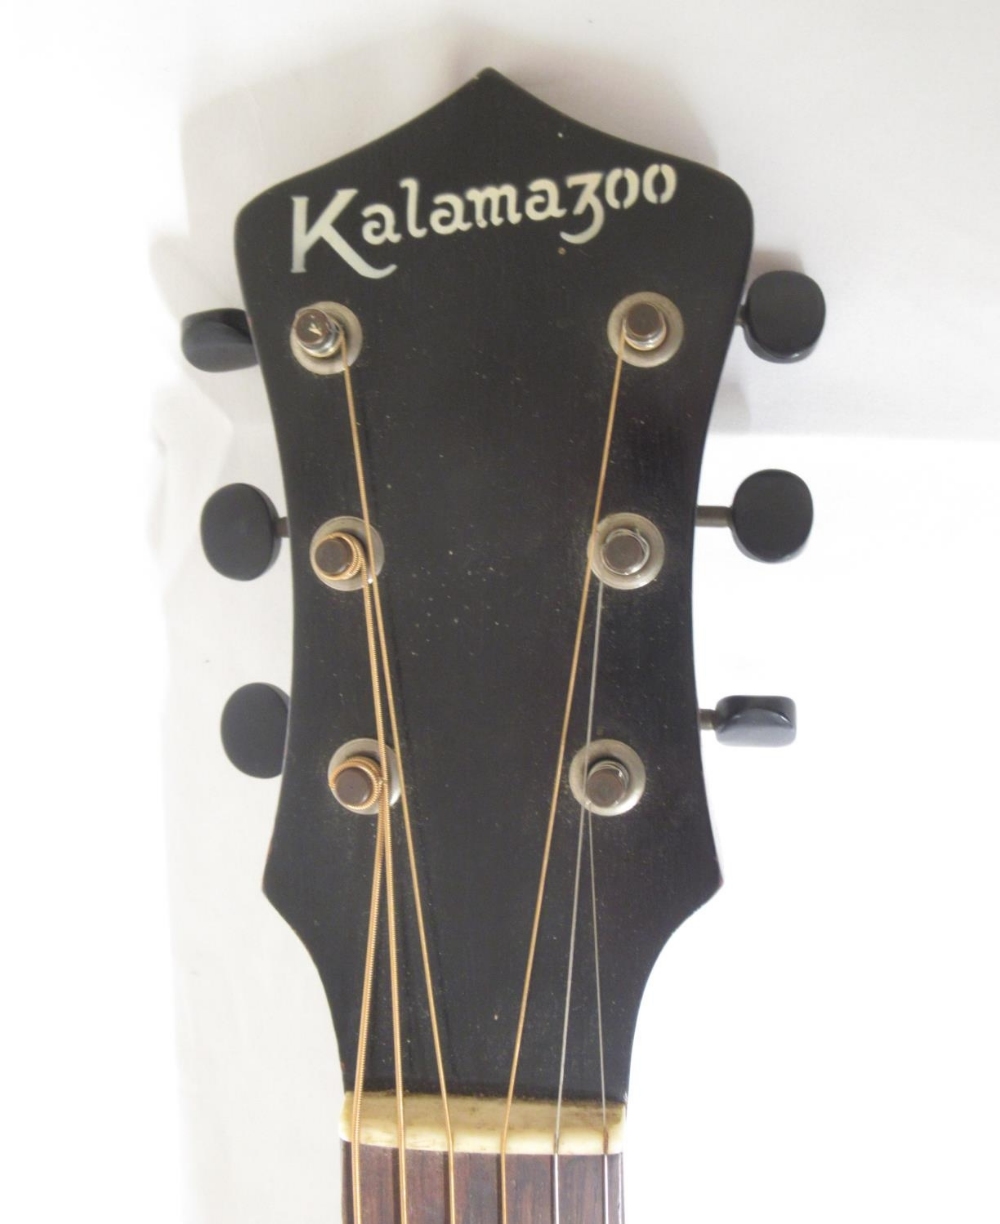 WITHDRAWN Kalamazoo by Gibson circa 1940s 6 string acoustic guitar, lacking Gibson sticker, serial n - Image 3 of 9